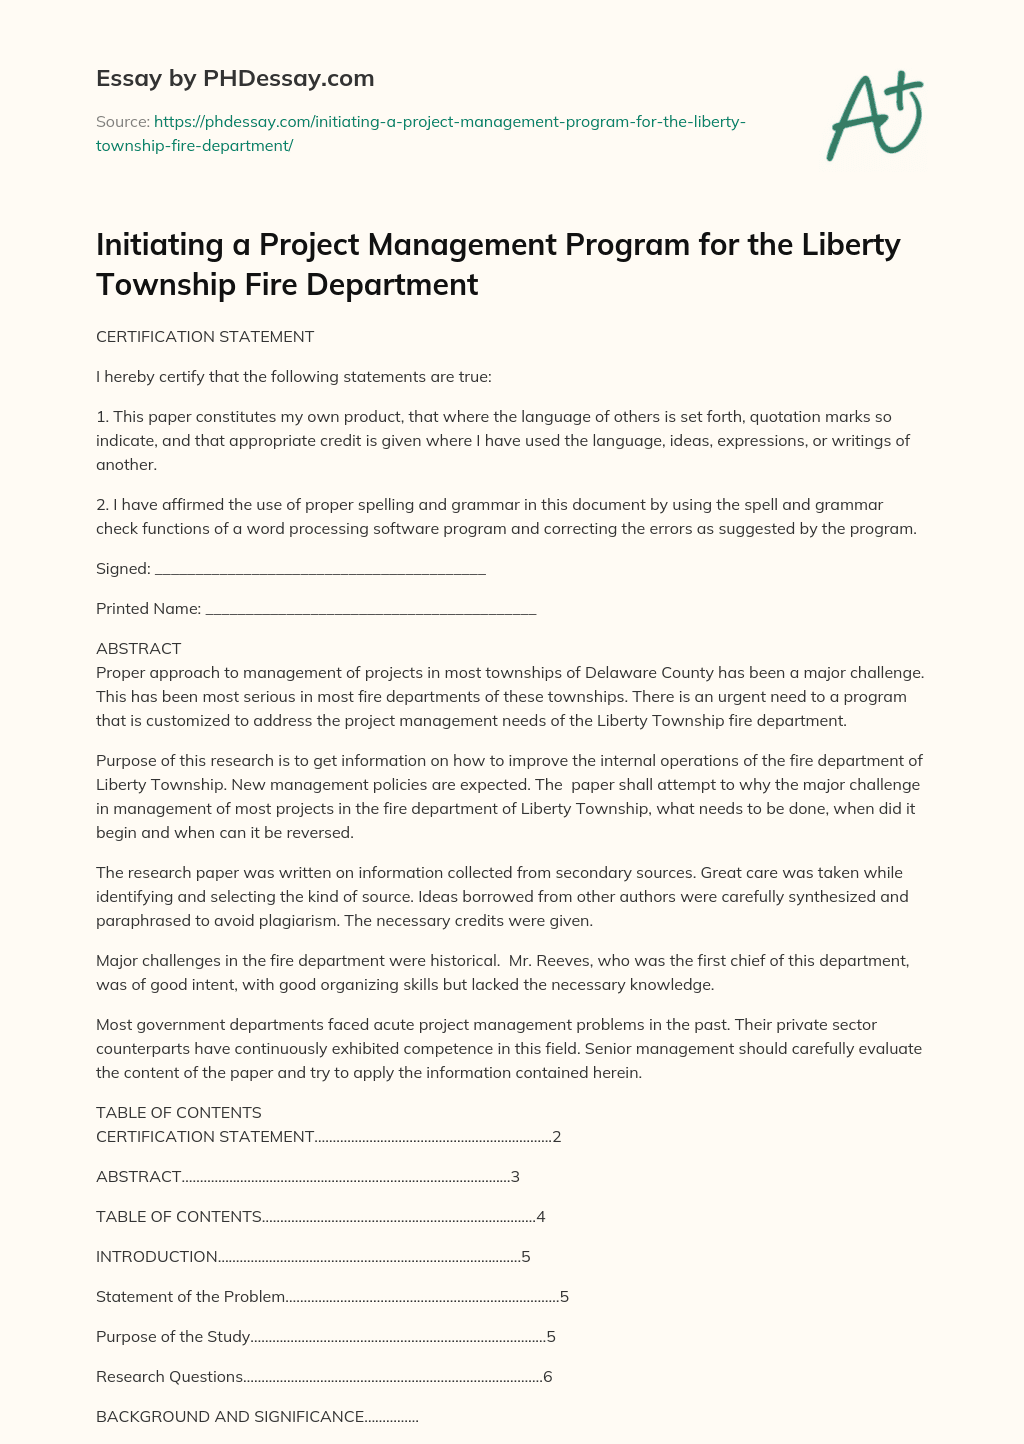 Initiating a Project Management Program for the Liberty Township Fire Department essay